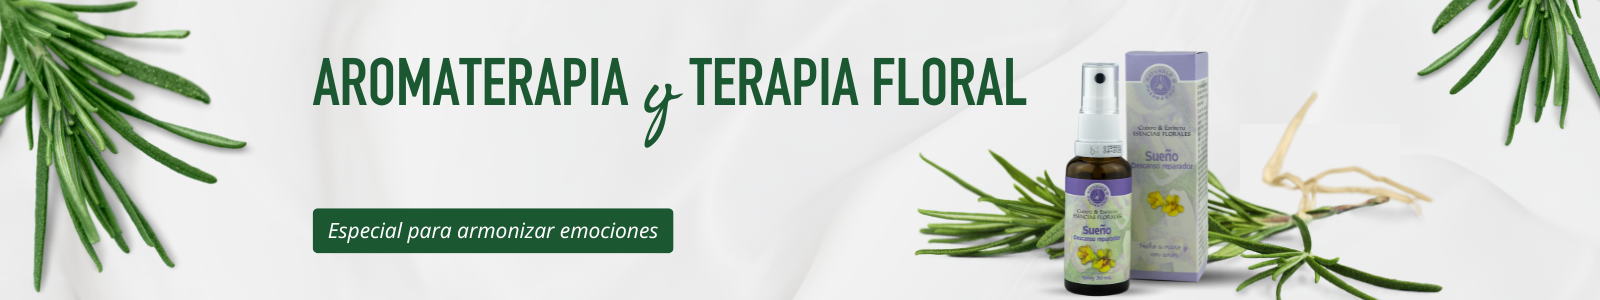 Banner Aromaterapia y Terapia Floral